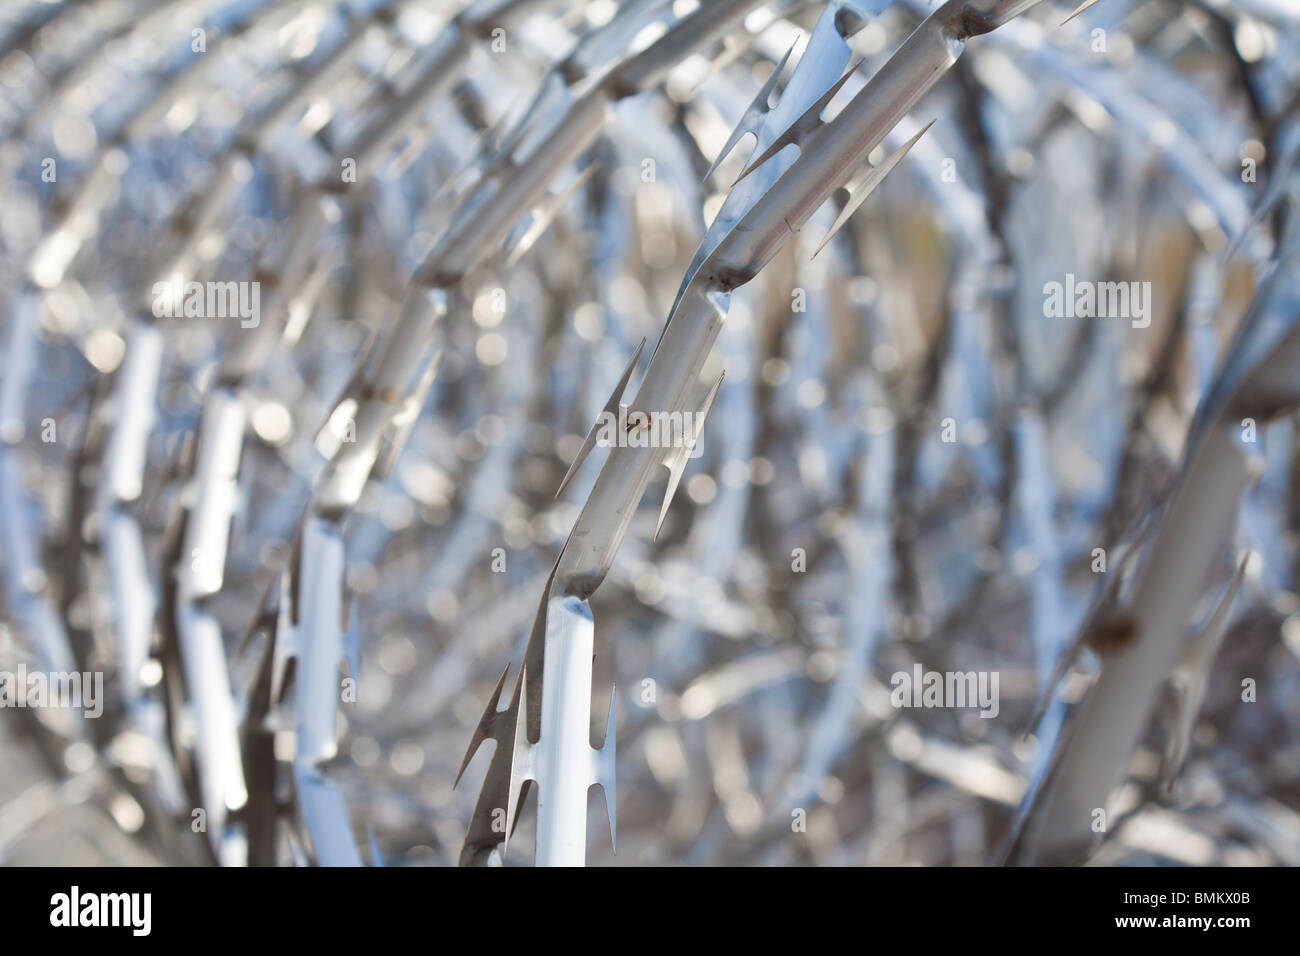 Rolls of stainless steel razor wire spirals keep prisoners away from chain link fence at correctional facility in Florida Stock Photo